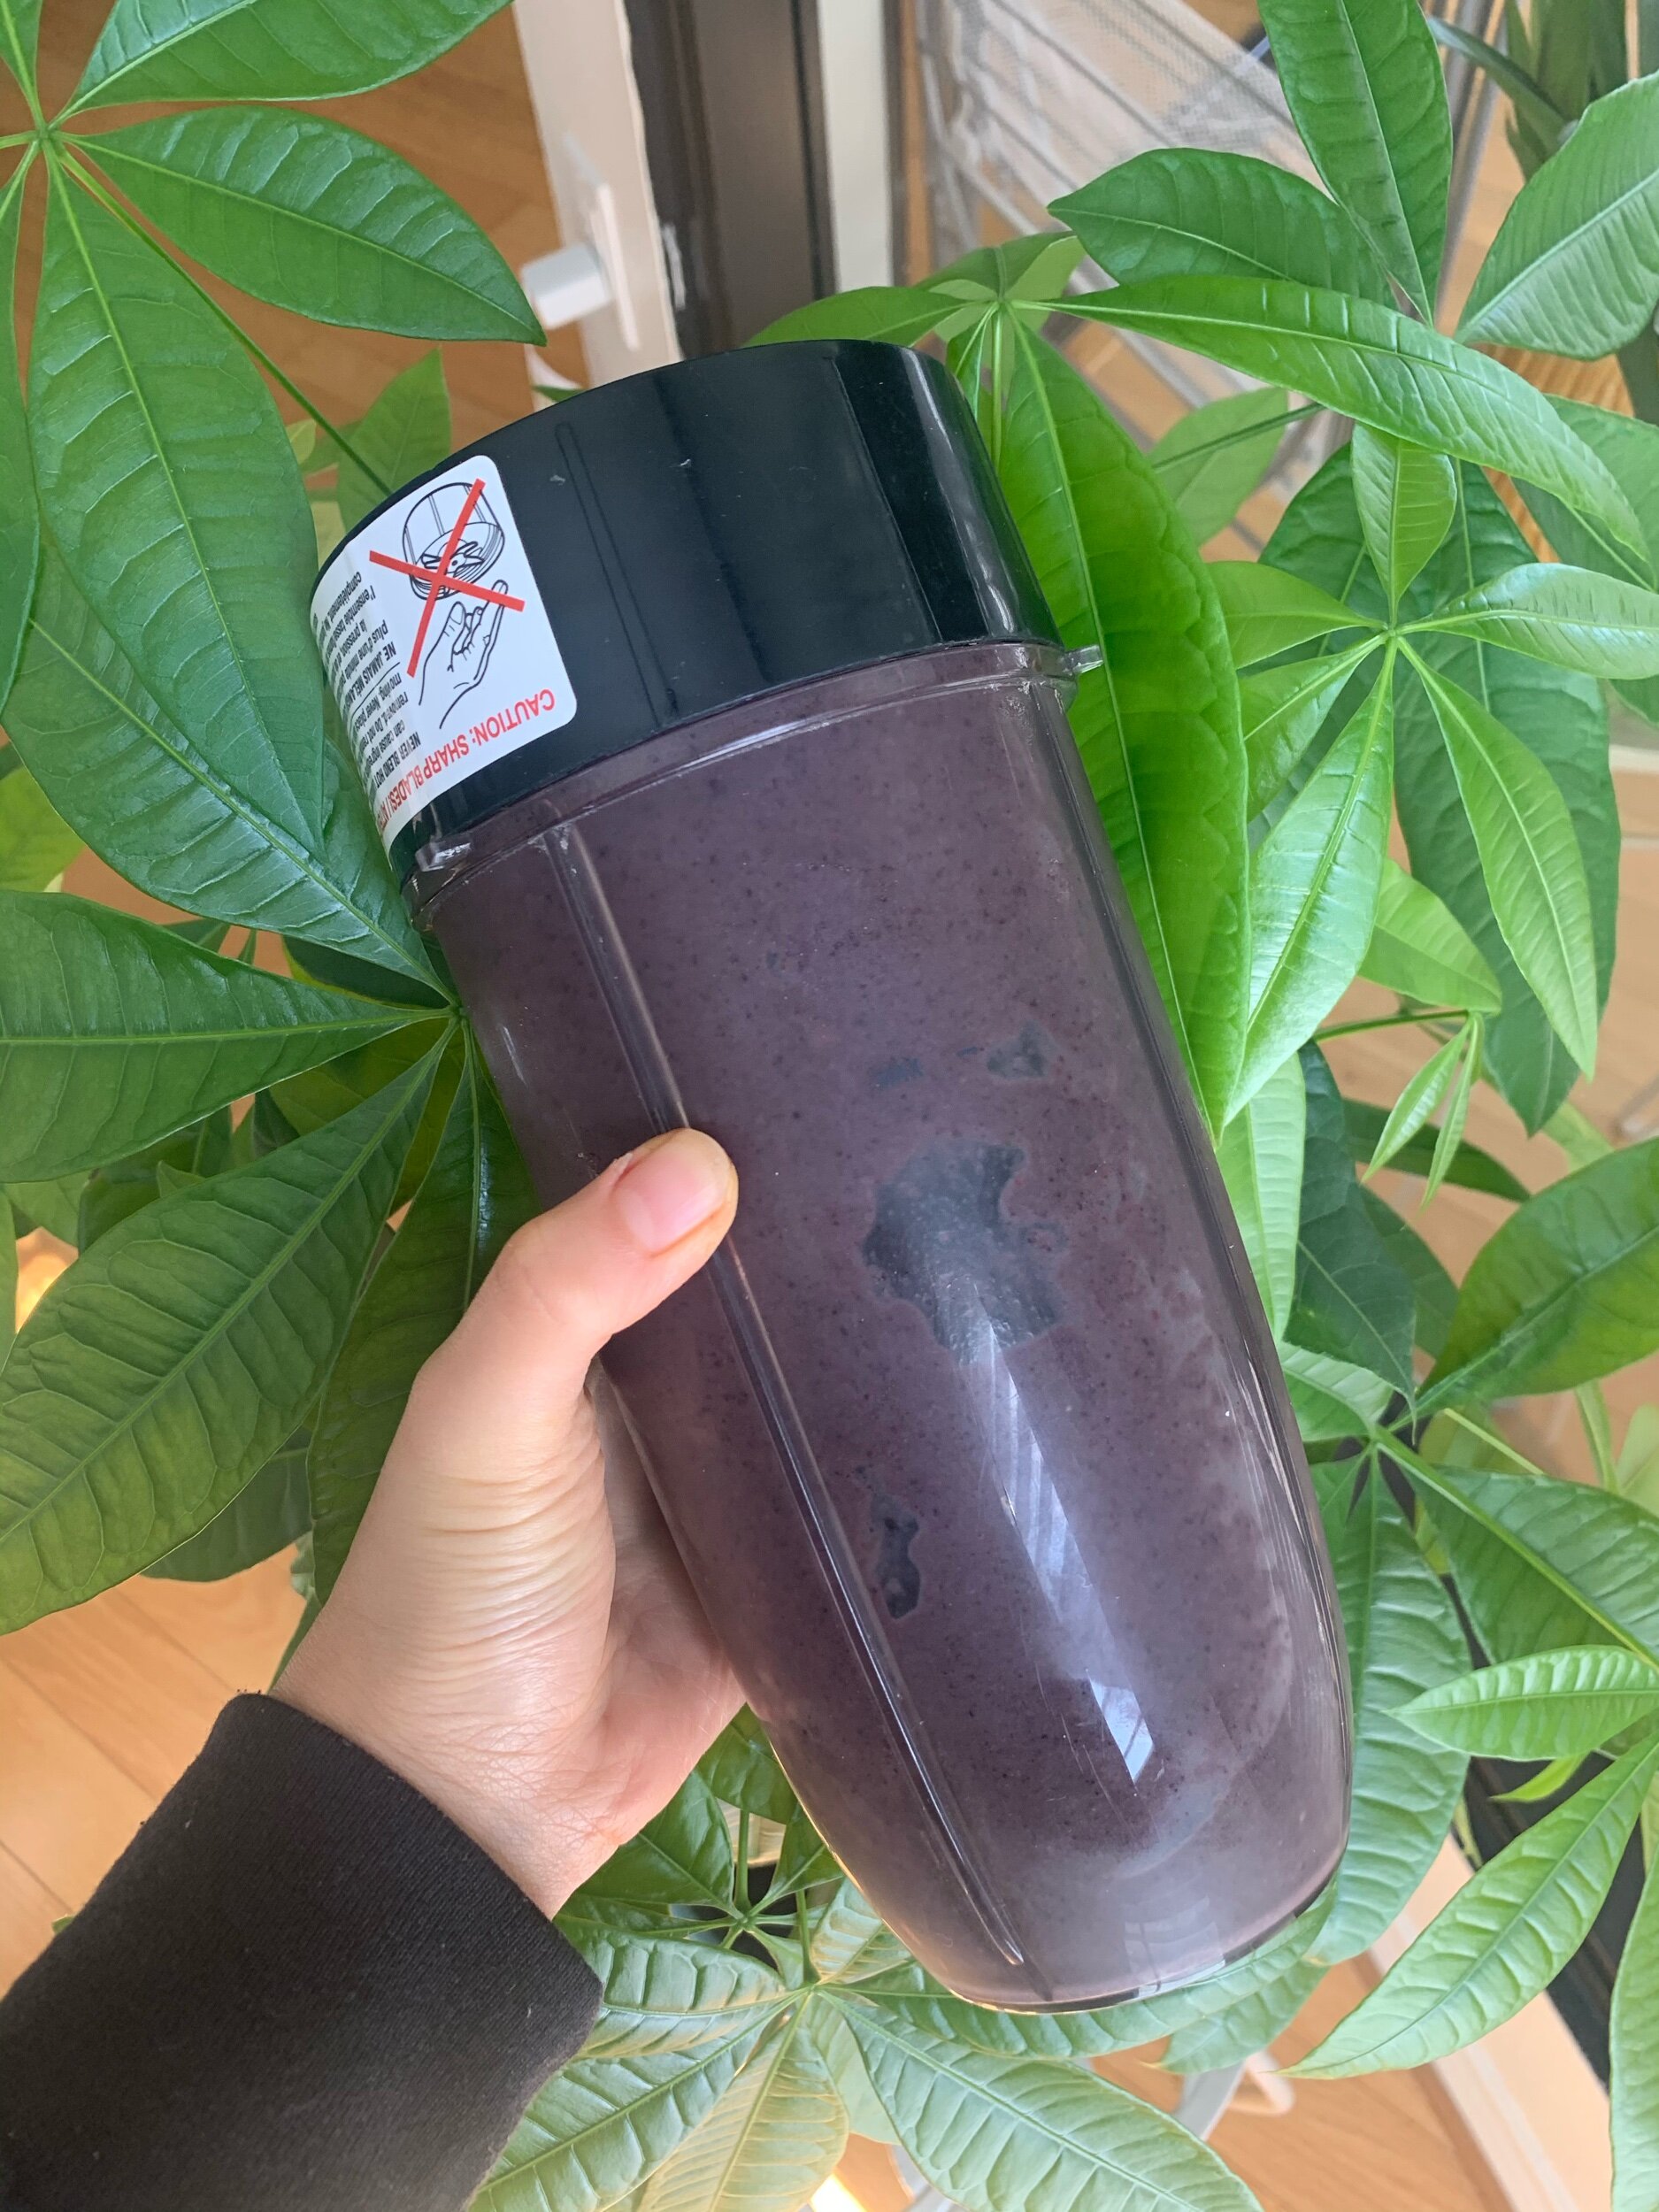 1 cilantro: 2 greens, blended